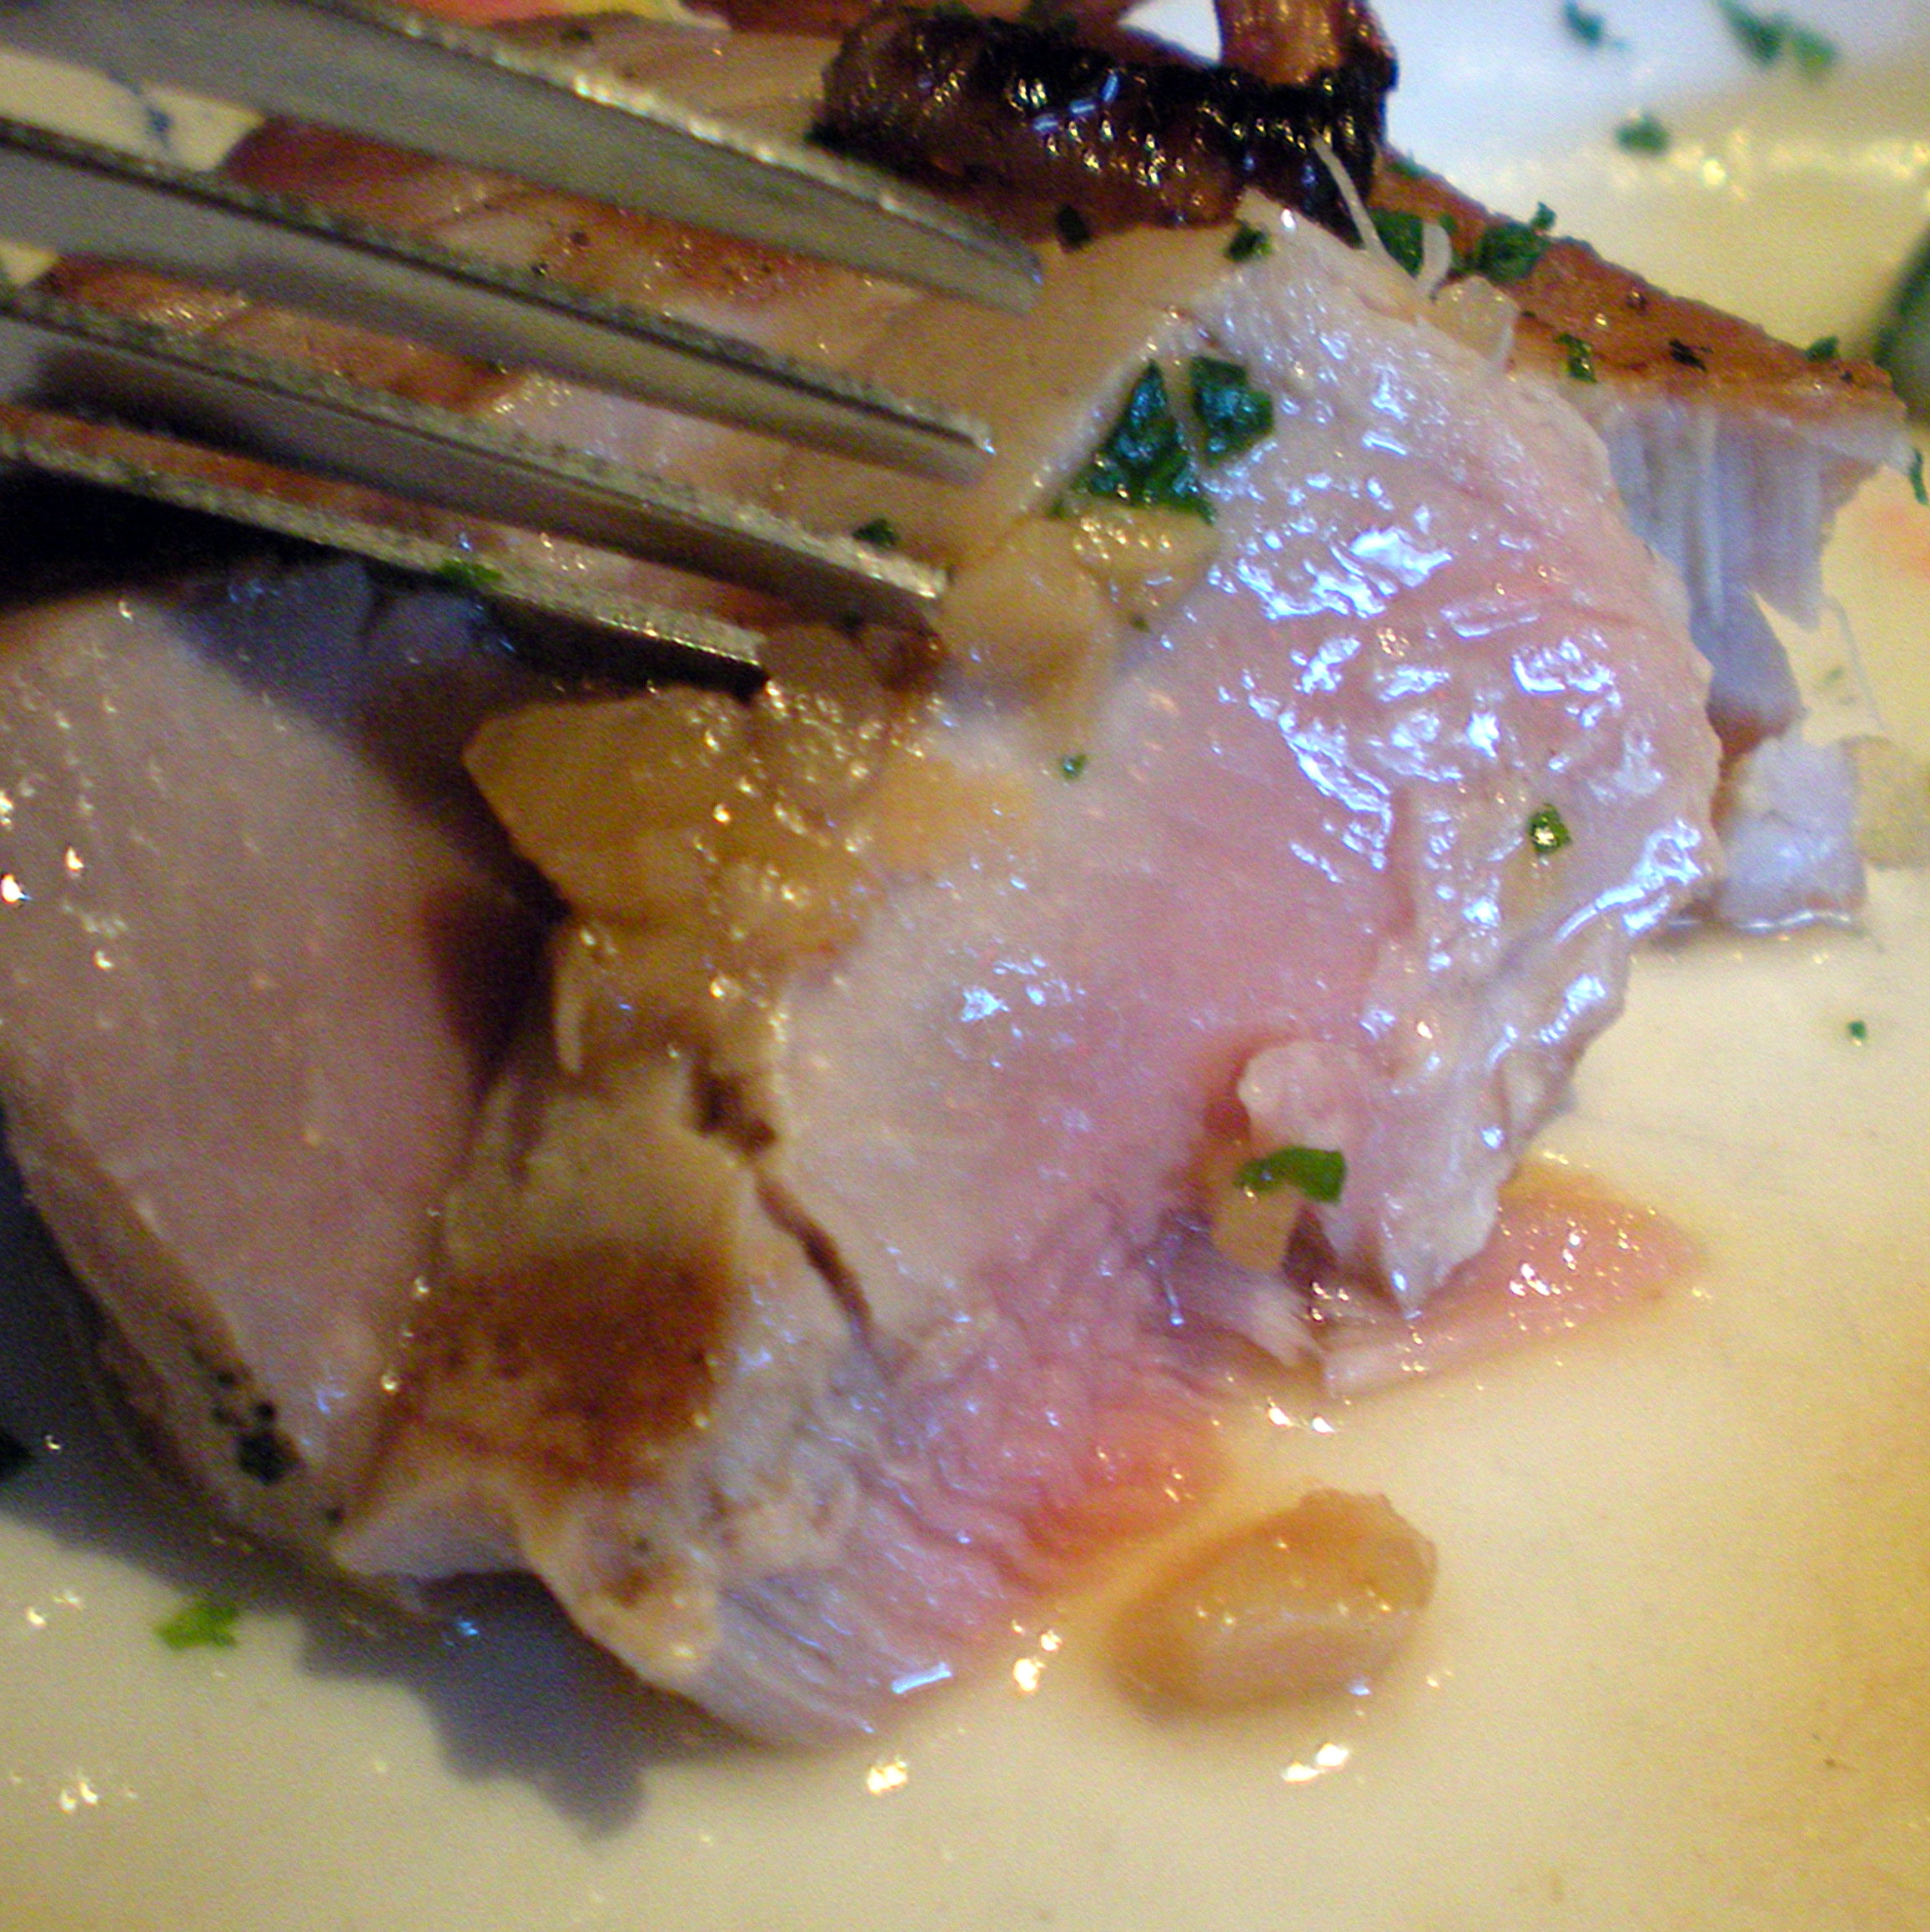 Look at this tuna. I ordered it medium-well and it was perfectly pale pink and oozing with moisture. 